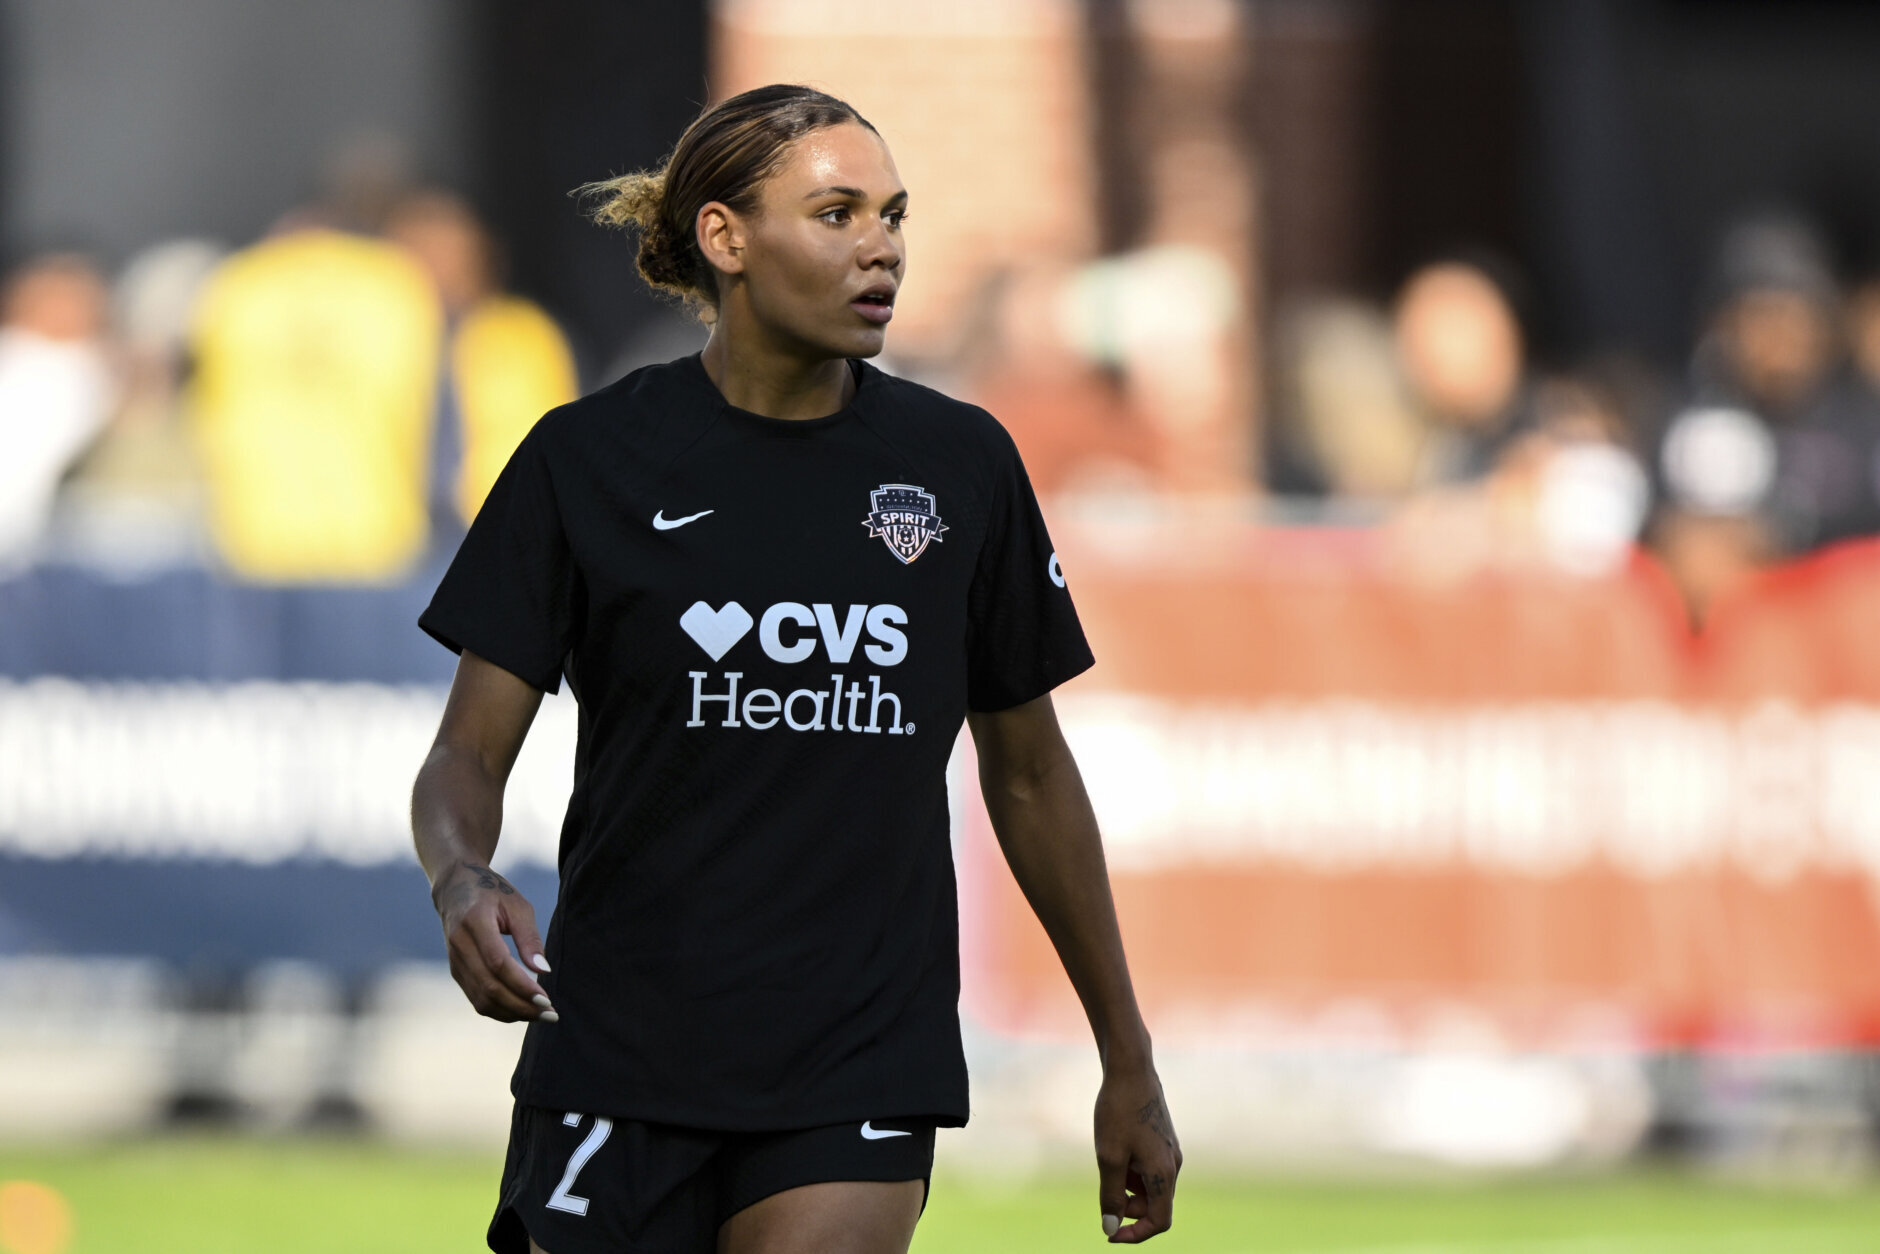 <h3>Spirit hits reset button for 2024 after midseason collapse</h3>
<p>For the Washington Spirit, 2023 is a year of so much promise that ended in disaster.</p>
<p>The <a href="https://wtop.com/local-sports/2022/11/parsons-returns-to-dc-as-spirits-new-head-coach/">return of veteran coach Mark Parsons</a> was supposed to <a href="https://wtop.com/local-sports/2023/03/back-to-basics-washington-spirit-look-to-focus-on-soccer-in-2023-nwsl-season/">bring stability to a club</a> looking to return to the postseason after a fruitless 2022 season.</p>
<p>A strong start — featuring strong play from midfielder Ashley Sanchez and a makeshift backline featuring midfielder Dorian Bailey and forward Tara McKeown — put Washington in second place in the standings heading into the Women’s World Cup break.</p>
<p>However, while losing <a href="https://wtop.com/local-sports/2023/06/a-dream-come-true-washington-spirit-players-reflect-on-being-named-to-us-womens-world-cup-team/">six players to tournament play</a>, Washington could not keep up the early-season momentum with its remaining roster of young but inexperienced players. The Spirit were bounced out of the Challenge Cup, and once its starters returned, Washington only won once in its final seven regular season games.</p>
<p>In a must-win situation during its <a href="https://wtop.com/soccer/2023/10/san-diego-wave-earn-nwsl-shield-in-final-match-of-the-regular-season/">season finale against North Carolina</a>, Washington could not score. Meanwhile, Trinity Rodman, the <a href="https://wtop.com/local-sports/2023/10/living-an-adult-life-as-a-kid-washington-spirits-trinity-rodman-on-growing-up-in-year-3-in-dc/">club’s most famous player</a>, earned her first career red card, leaving the field sobbing as the Spirit’s season ended in another defeat.</p>
<p>With an <a href="https://wtop.com/local-sports/2023/03/washington-spirit-owner-says-possible-rebrand-plans-in-progress/">impending rebrand coming soon,</a> Washington is again hitting the reset button. <a href="https://wtop.com/local-sports/2023/10/washington-spirit-fires-mark-parsons-after-1-season/">The club fired Parsons</a> after one season and let go of nine players to start its offseason.</p>
<p>The addition of two more expansion teams in the NWSL in 2024 and a <a href="https://wtop.com/soccer/2023/05/new-professional-womens-soccer-league-to-launch-in-us-in-2024/">second pro women’s league</a> in the horizon, the Spirit will be dealing with a more competitive women’s soccer environment than years past.</p>
<p>Can Washington stay relevant and make impactful long term moves for its future? With the Paris Olympics on the horizon, will team president and general manager Mark Krikorian assemble a roster that can stay competitive throughout the season?</p>
<p>Whatever the case, changes are coming for a Spirit side looking to regain its 2021 championship swagger and have consistent results in 2024.</p>
<p><em>— José Umaña</em></p>
